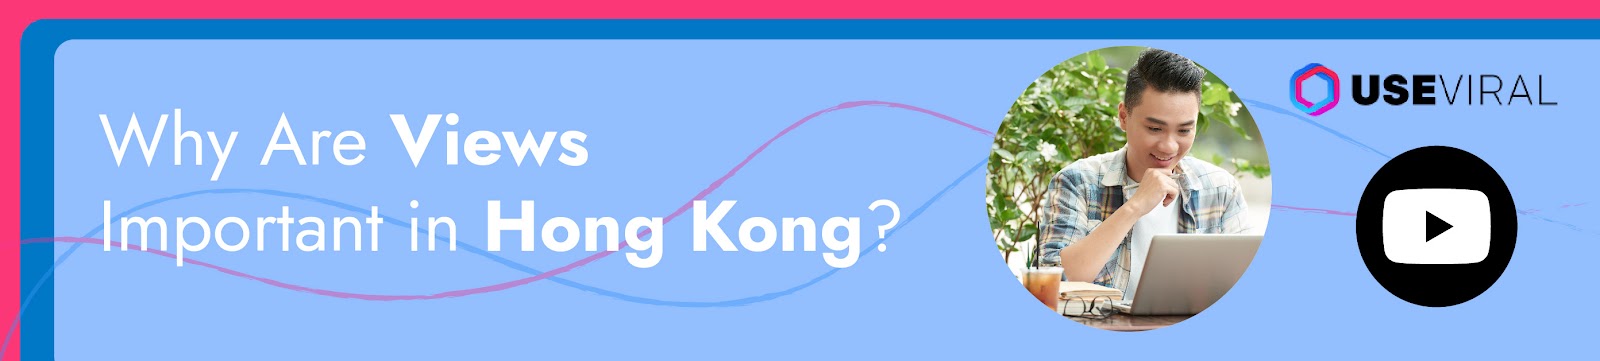 Why Are Views Important in Hong Kong?